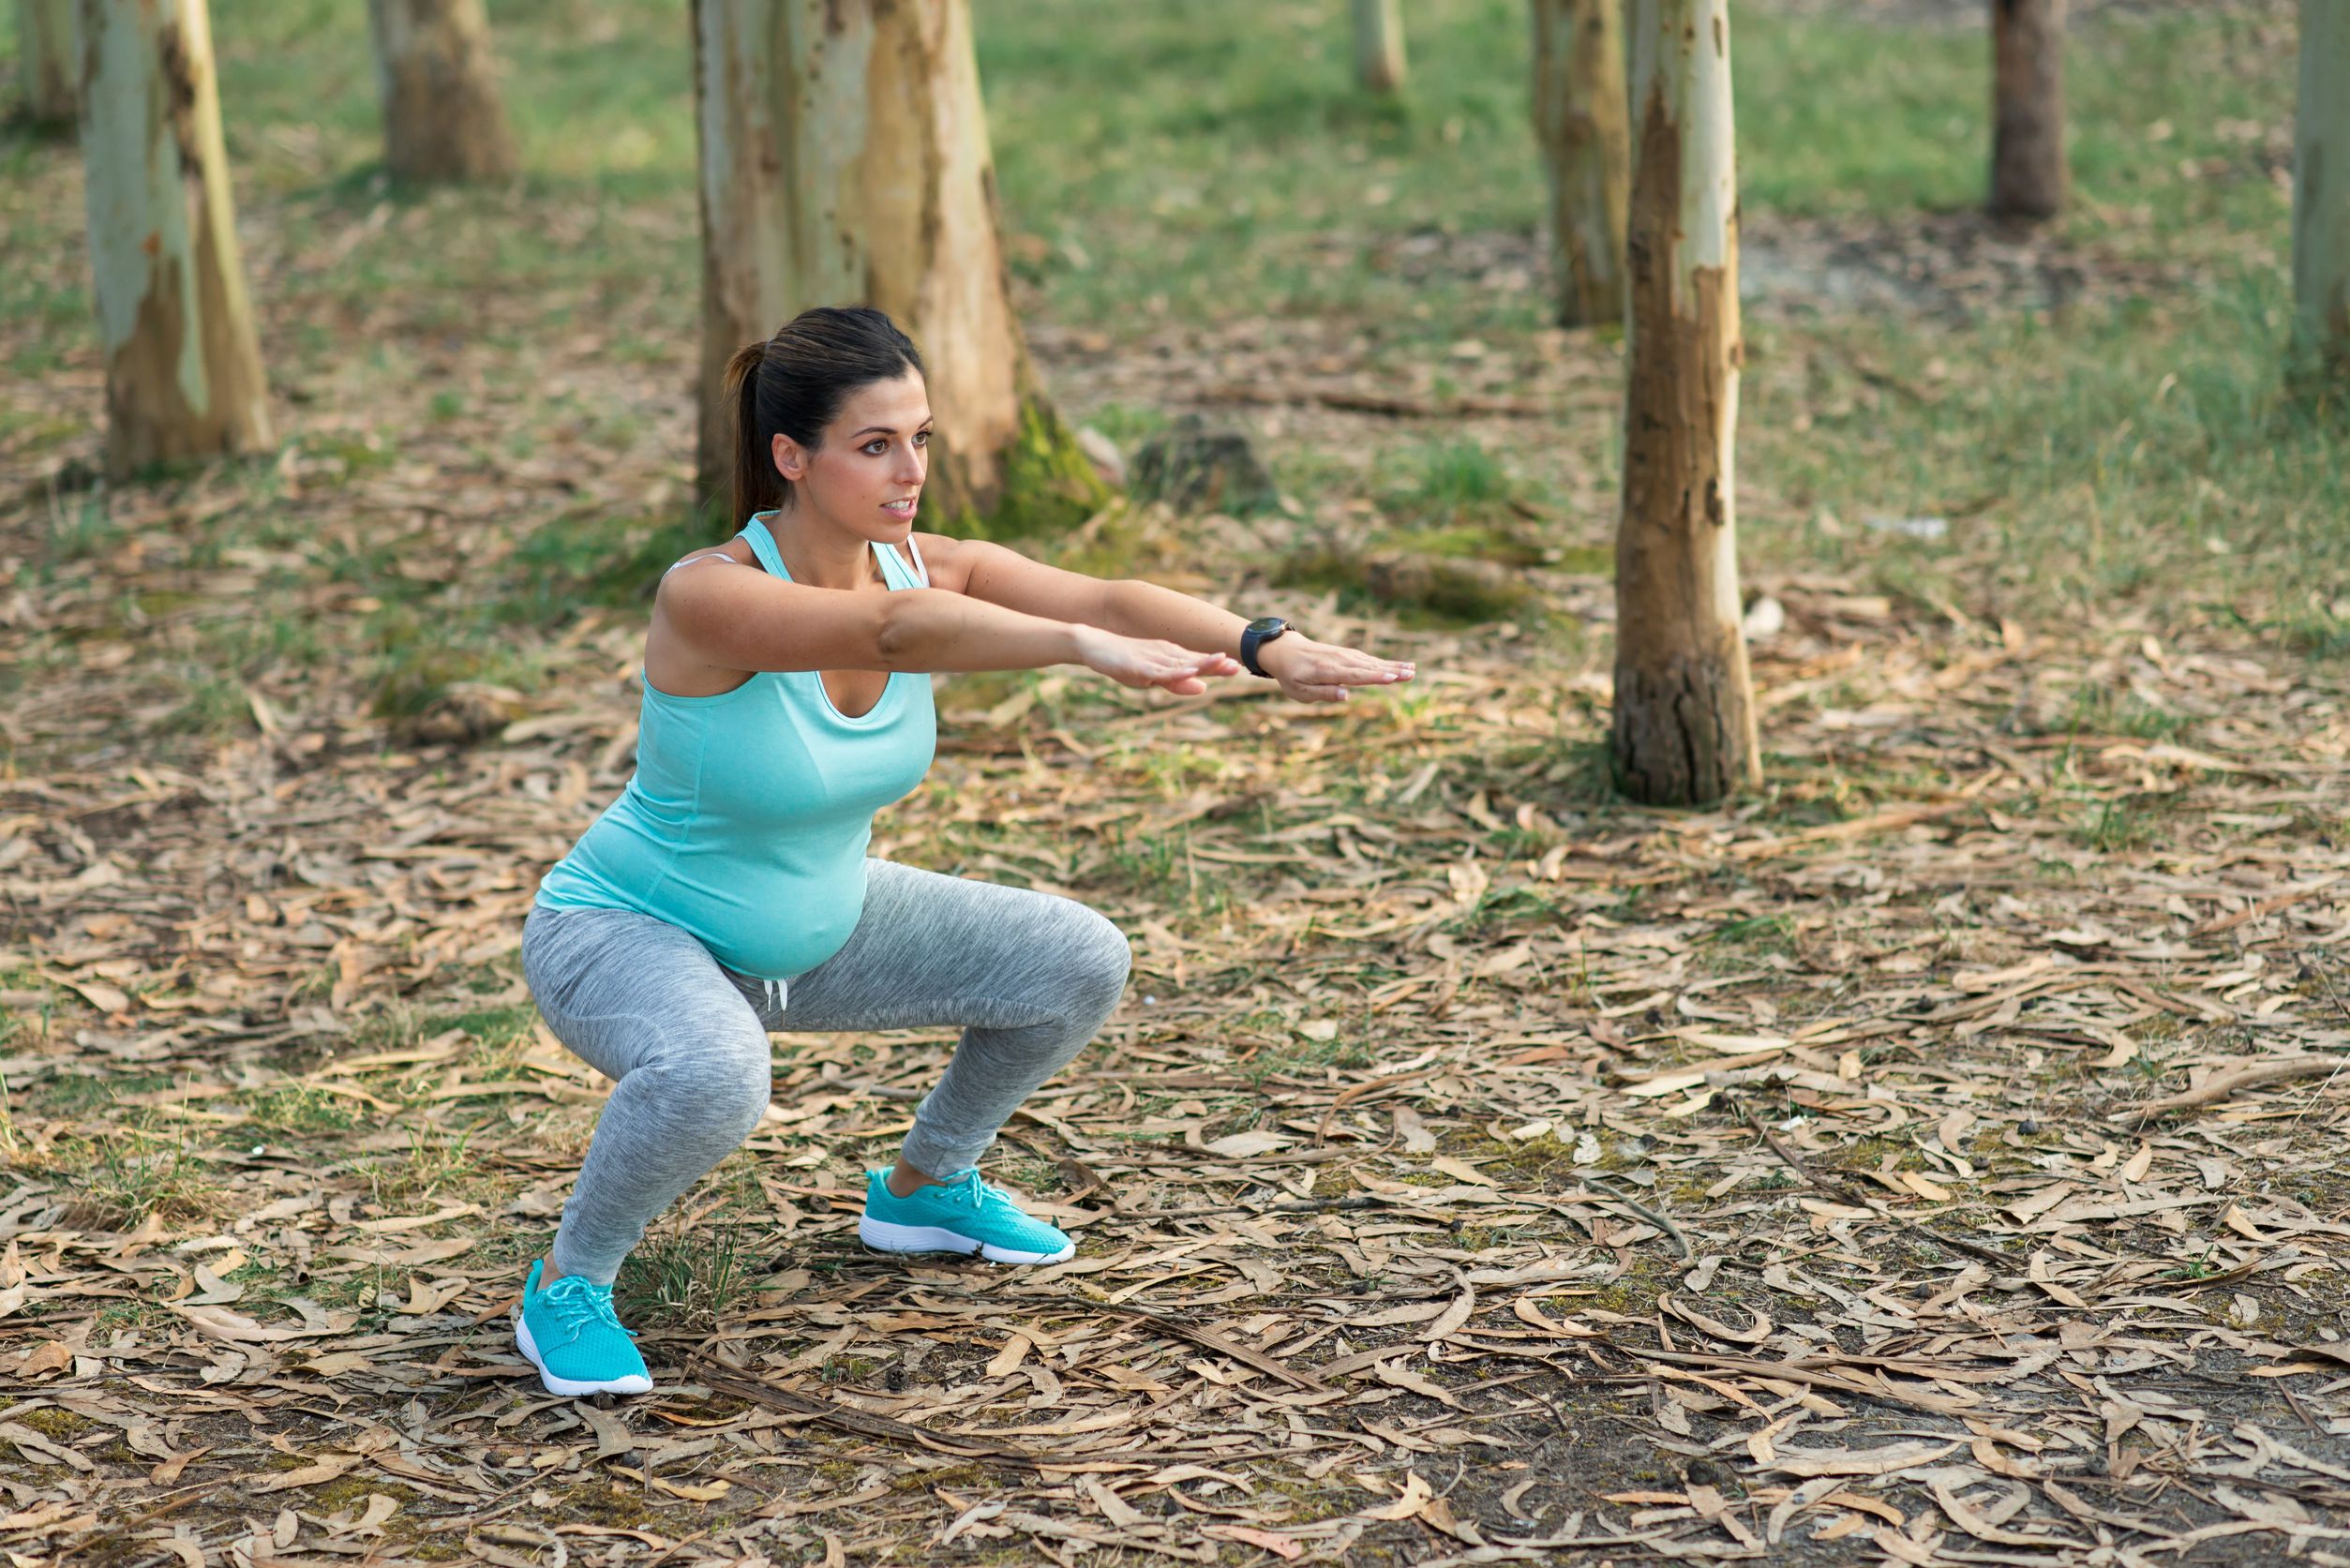 Pregnant fitness woman doing squats outdoor